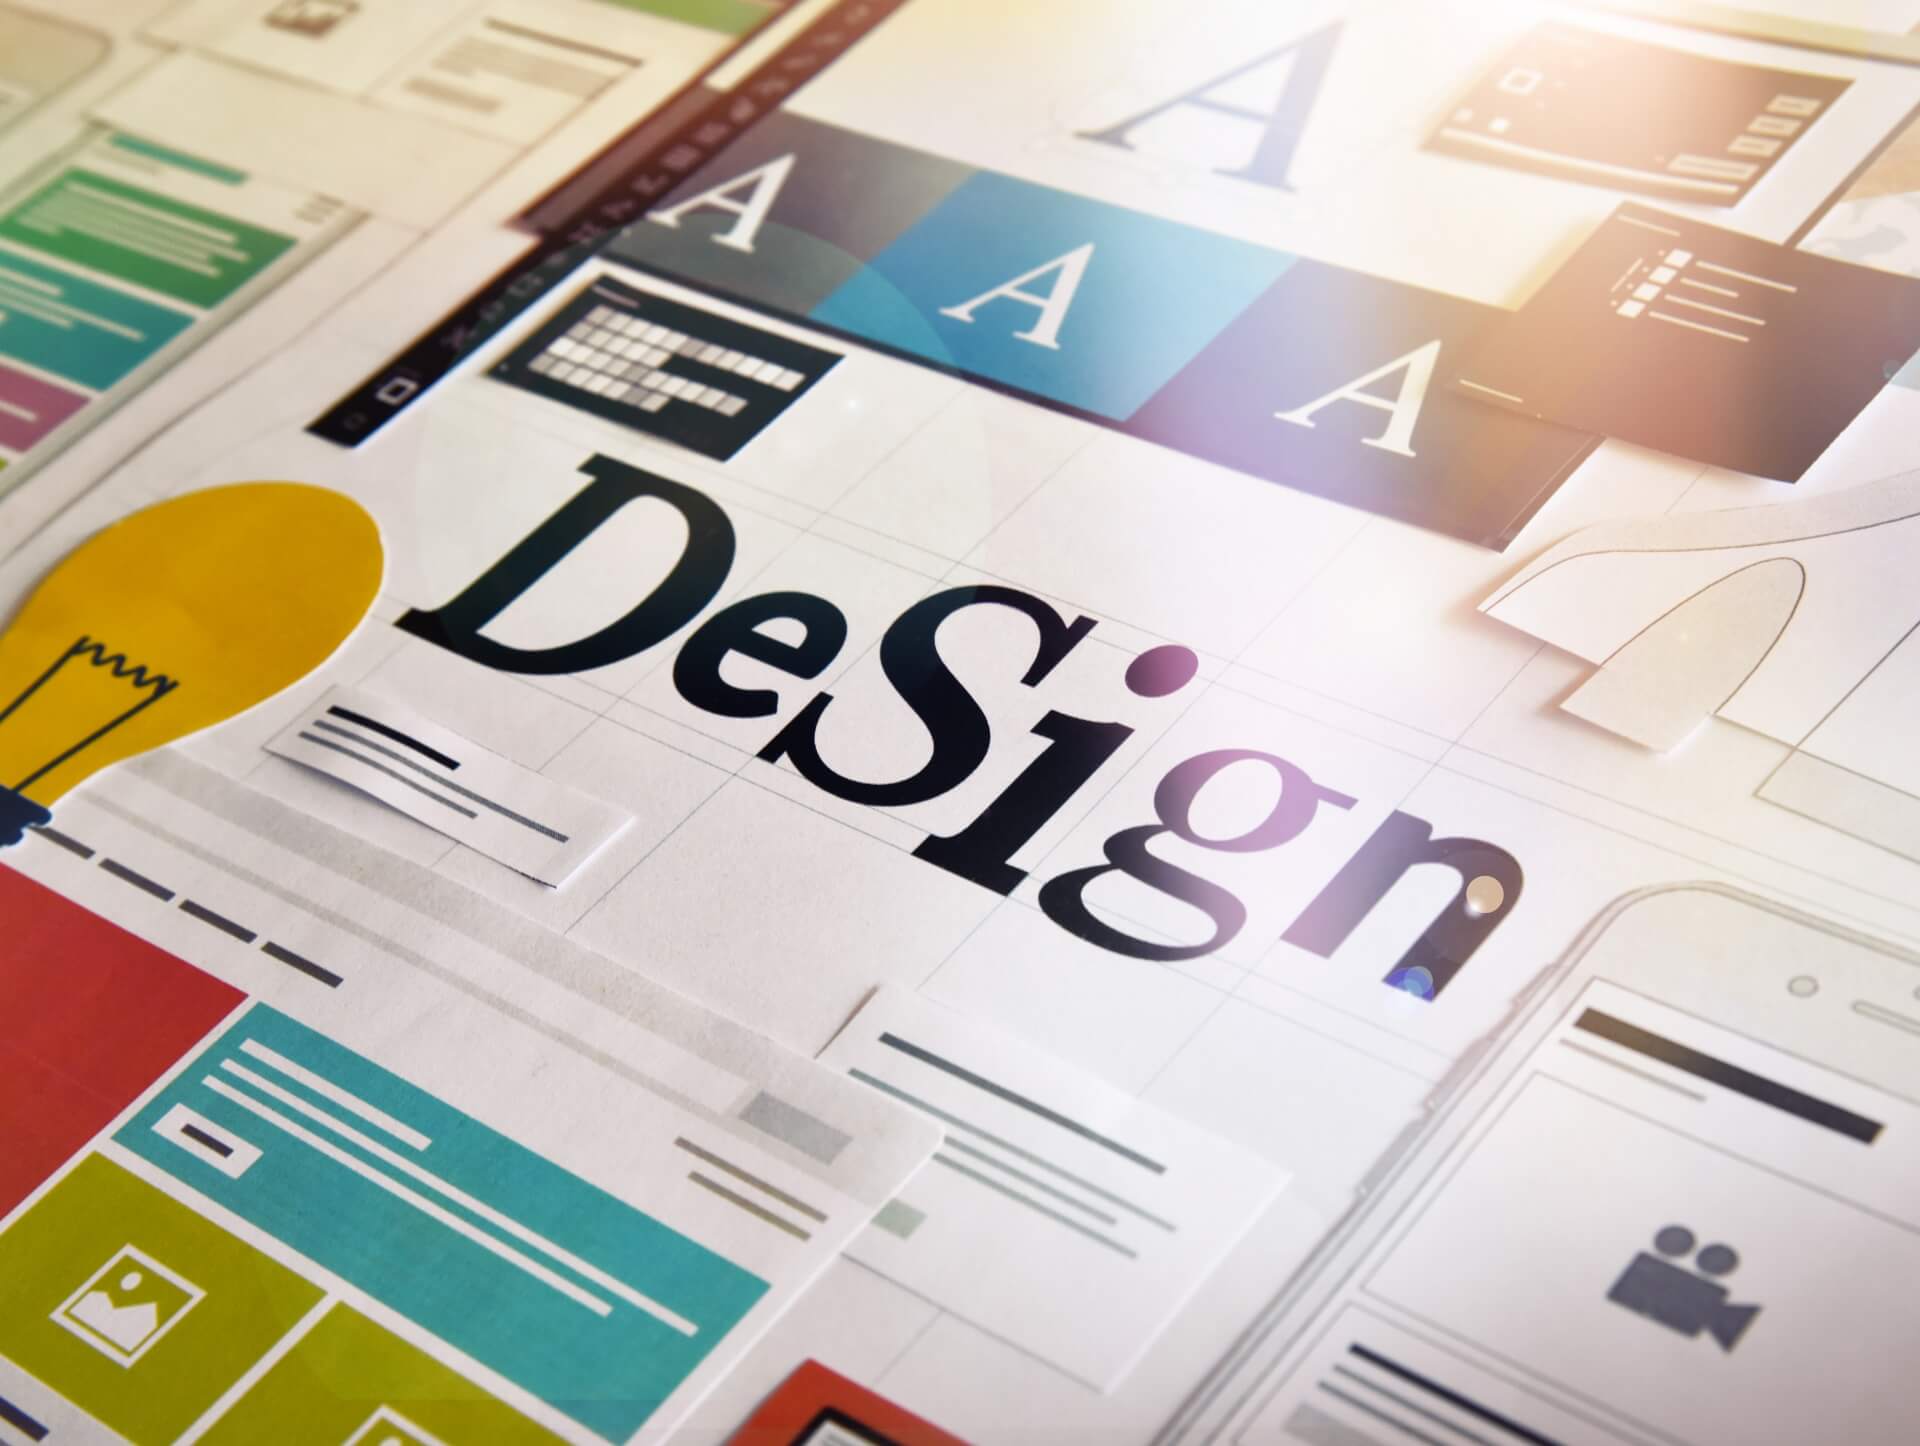 The relationship between graphic design and user experience